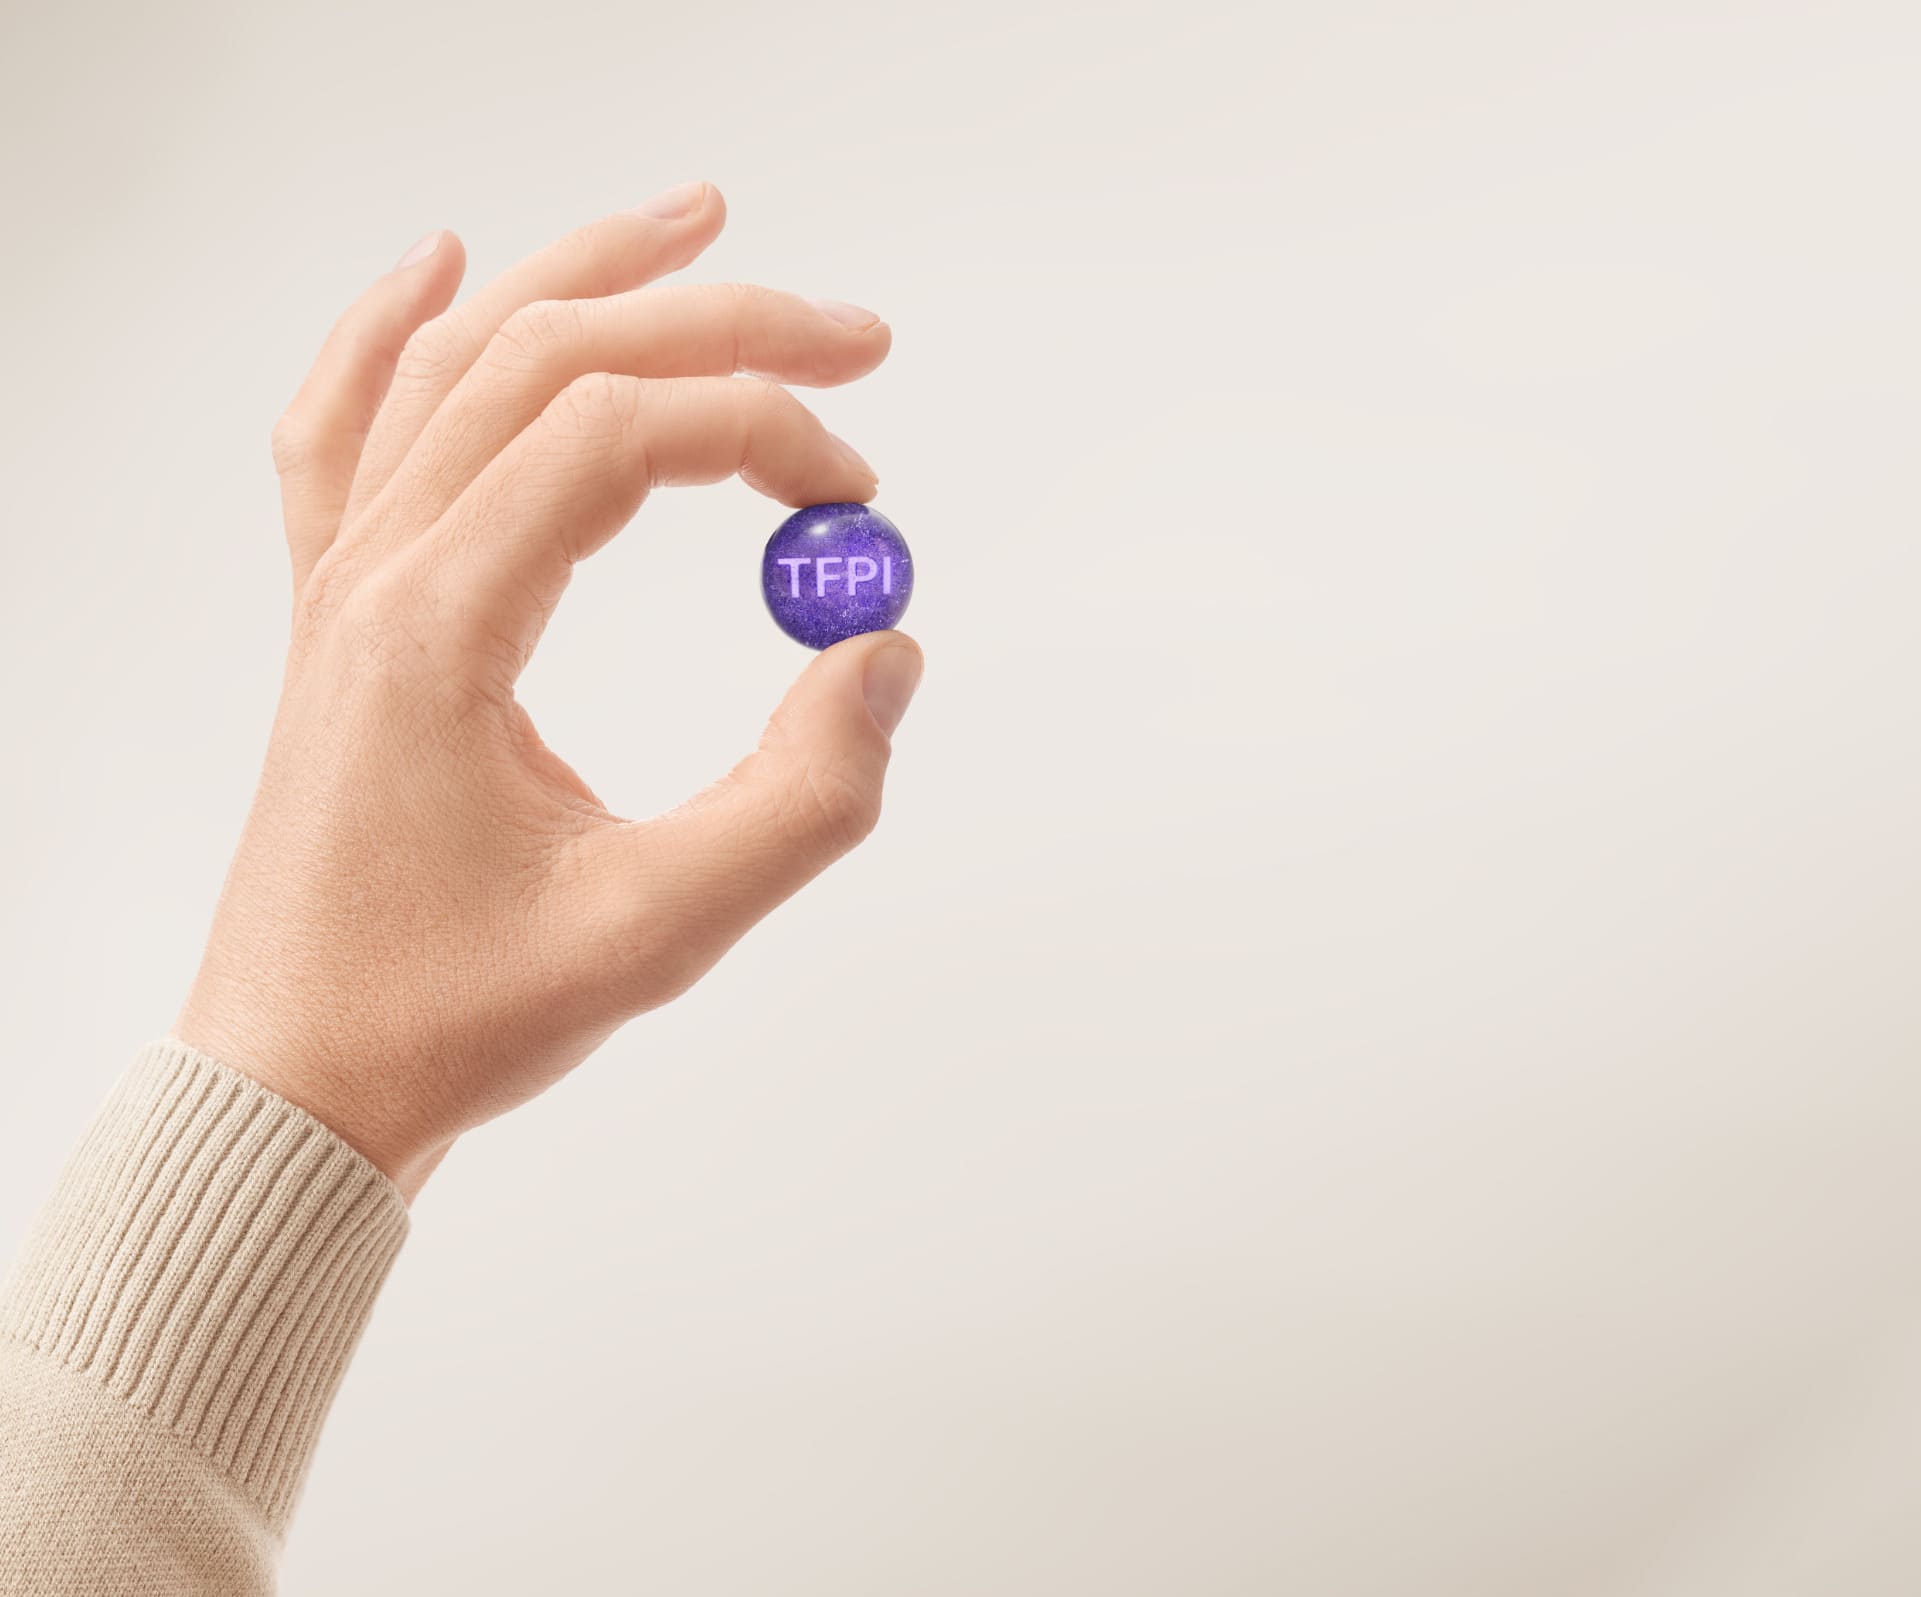 A hand holding a small purple ball representing TFPI